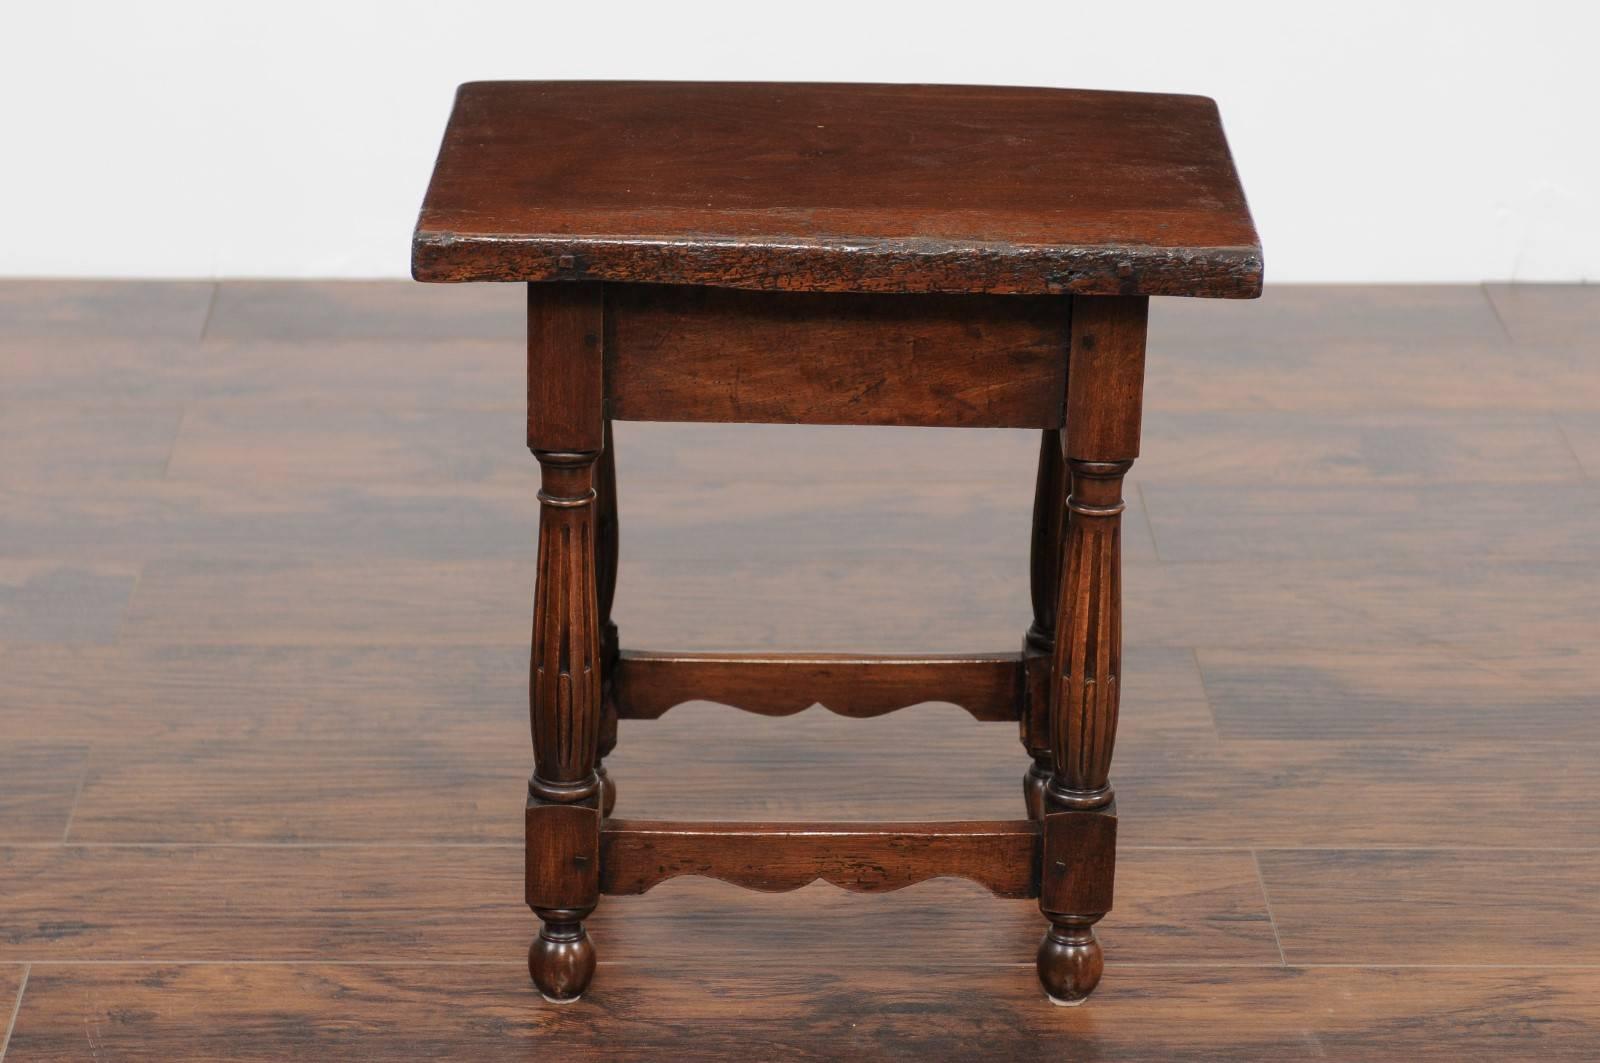 Petite Italian Walnut Side Table with Single Drawer and Fluted Legs, circa 1870 For Sale 3